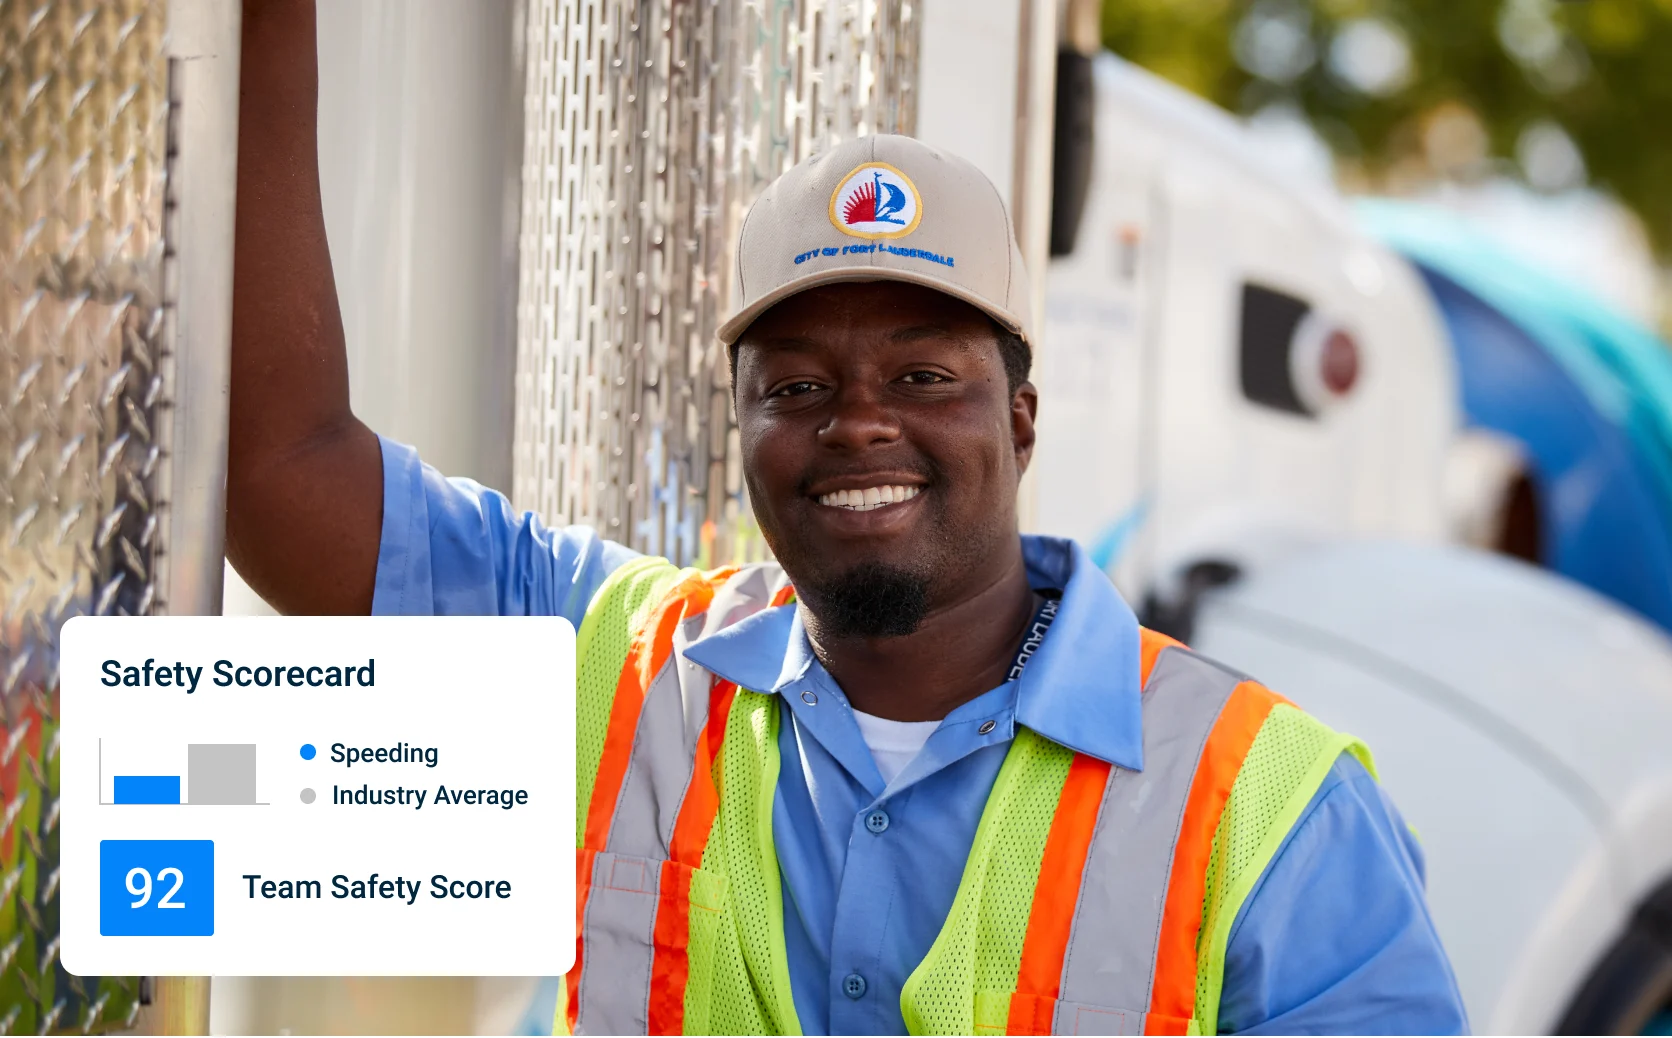 Smiling employee in yard. Overlay of safety scorecard with employee’s speeding vs. industry average and team safety score.